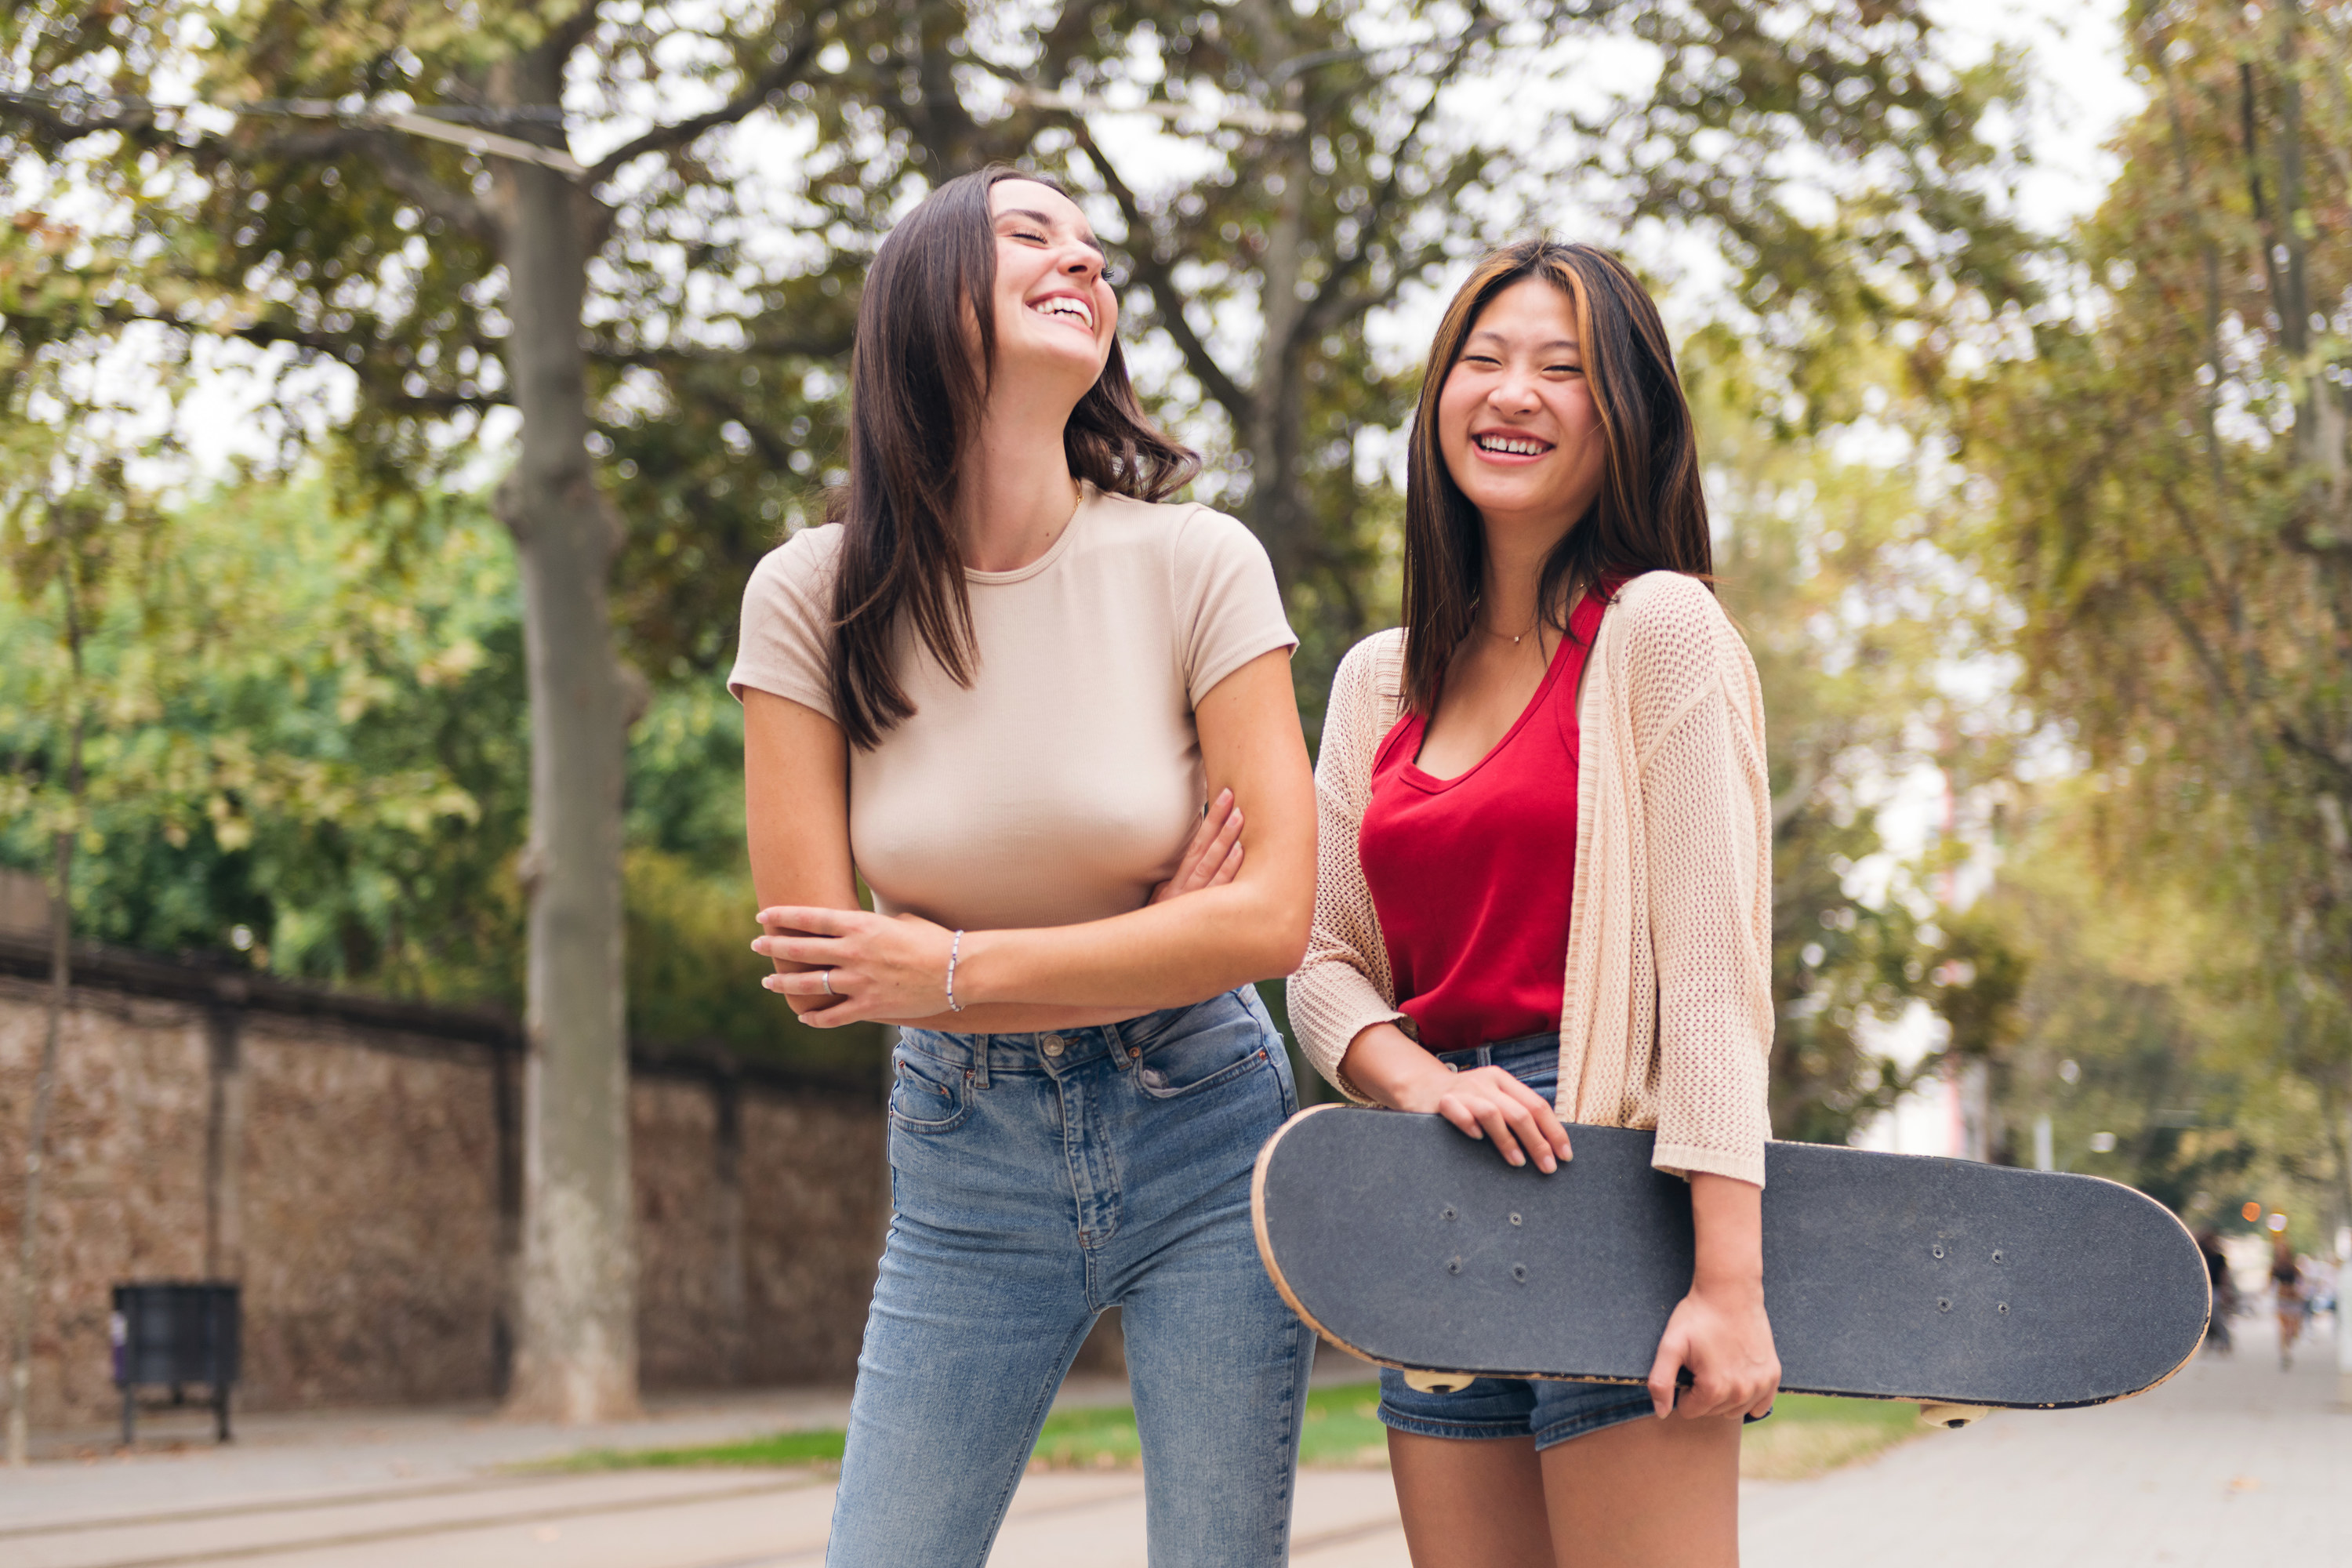 Two women laughing while one holds a skateboard